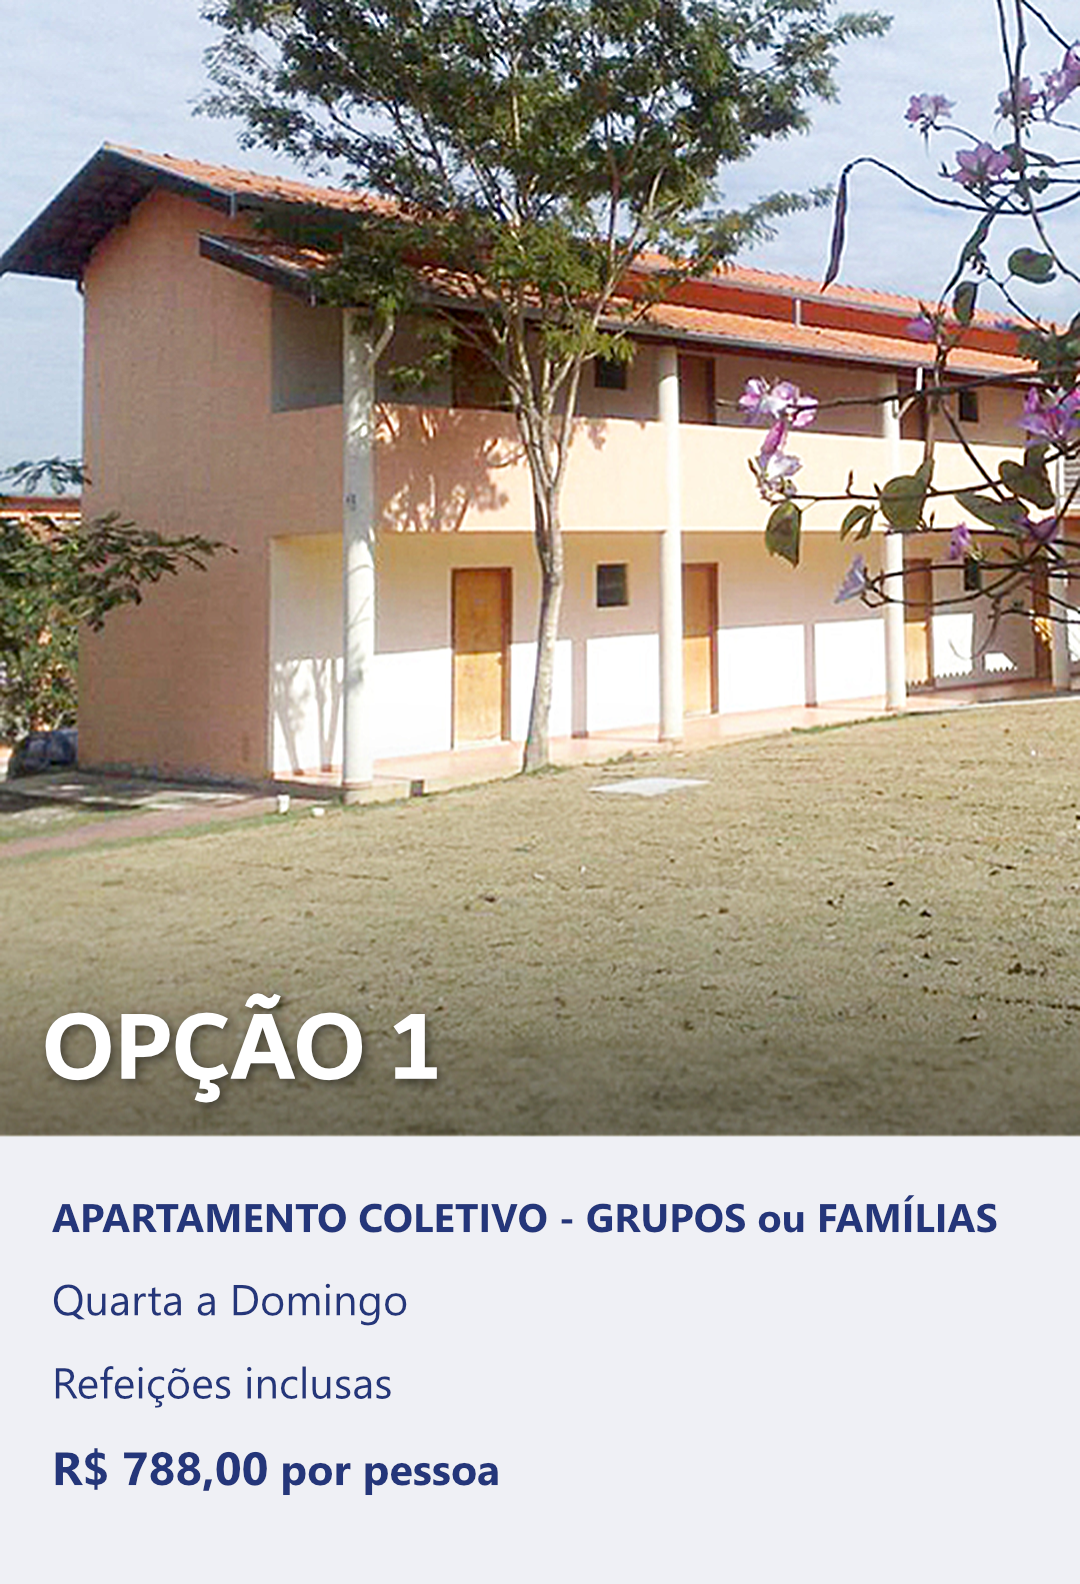 OPTION 01 - COLLECTIVE APARTMENT for GROUPS / FAMILIES